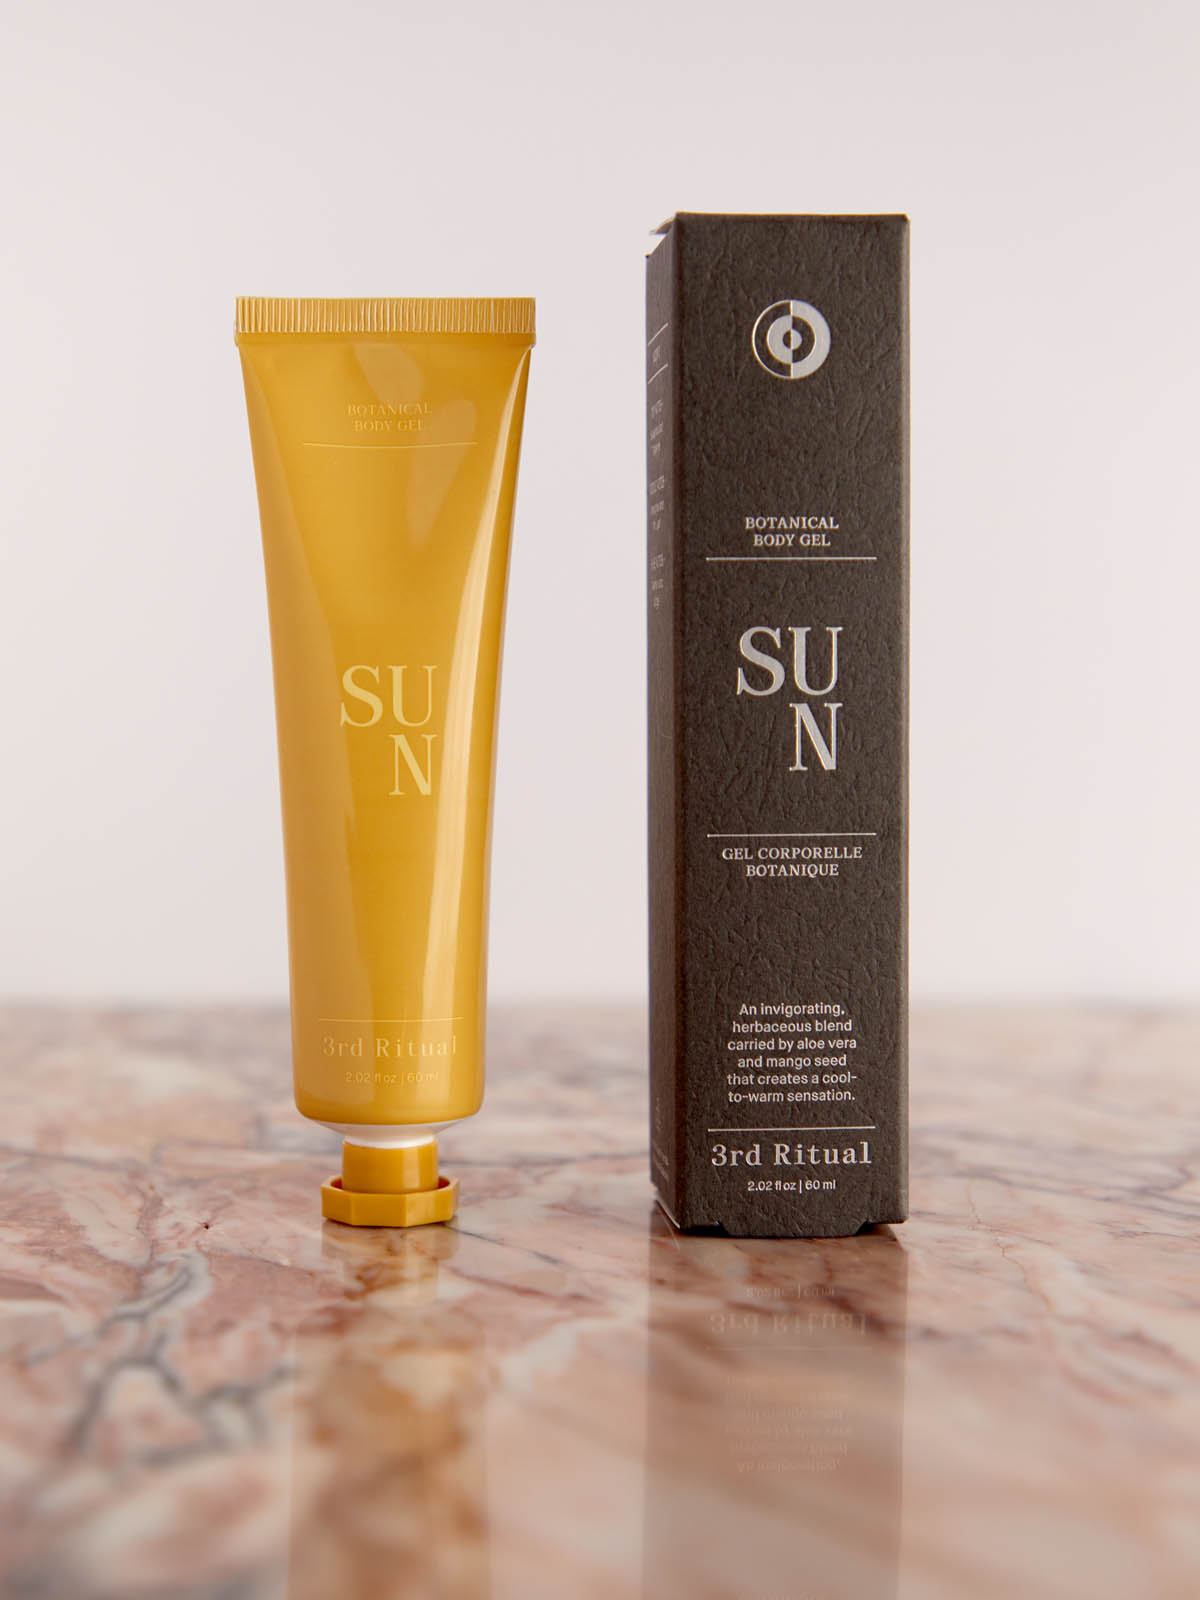 Sun Botanical Body Gel with box on pink marble